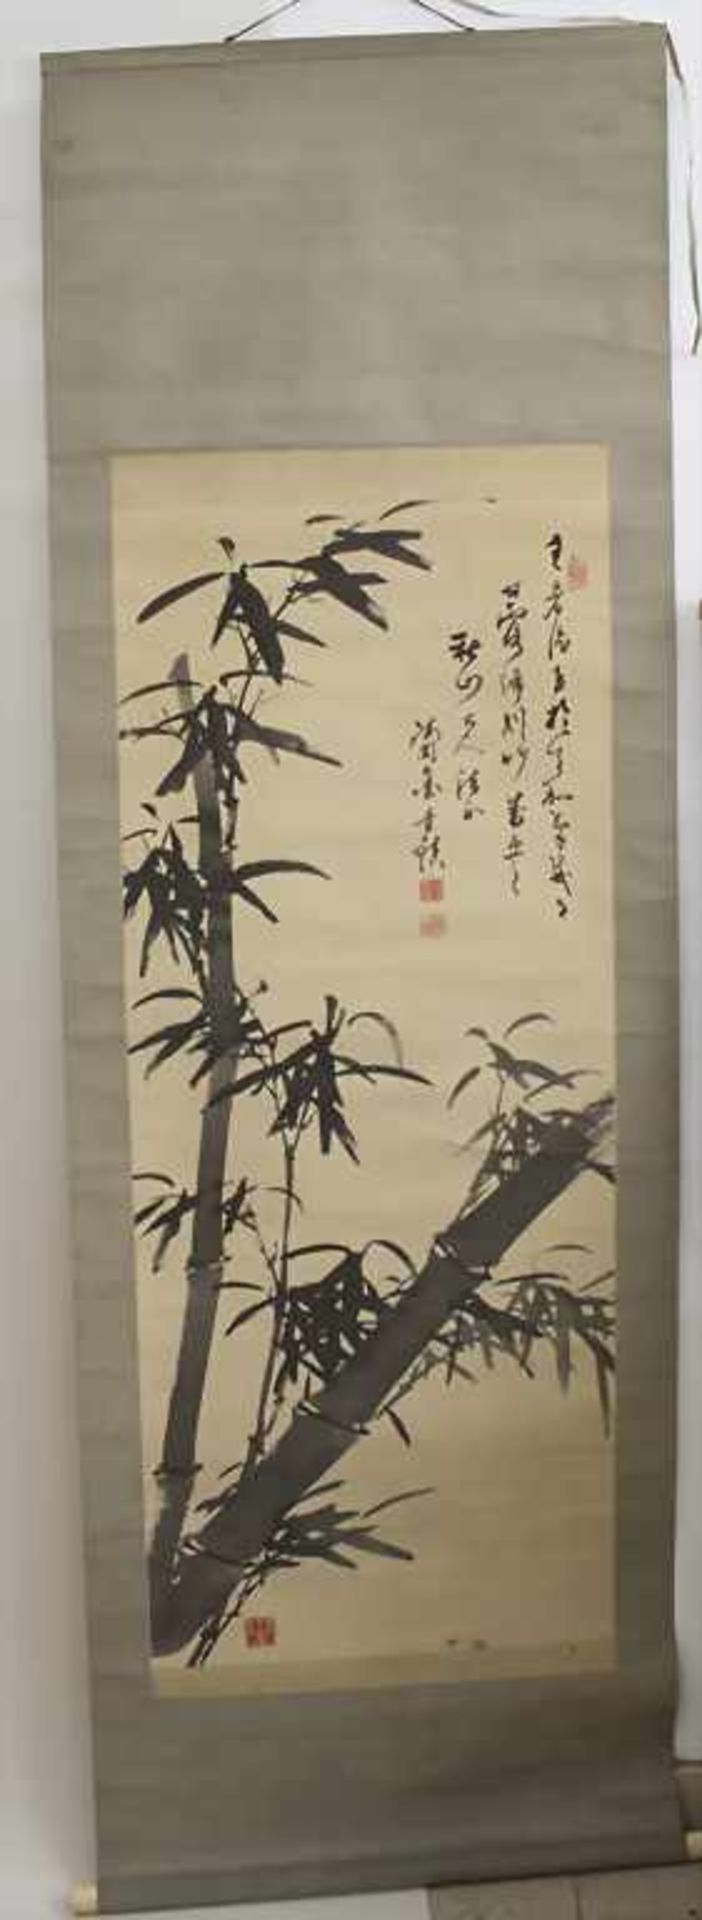 Rollbild 'Bambuszweige' / A scroll painting 'Bamboo branches', China, um 1900Material: Tusche auf